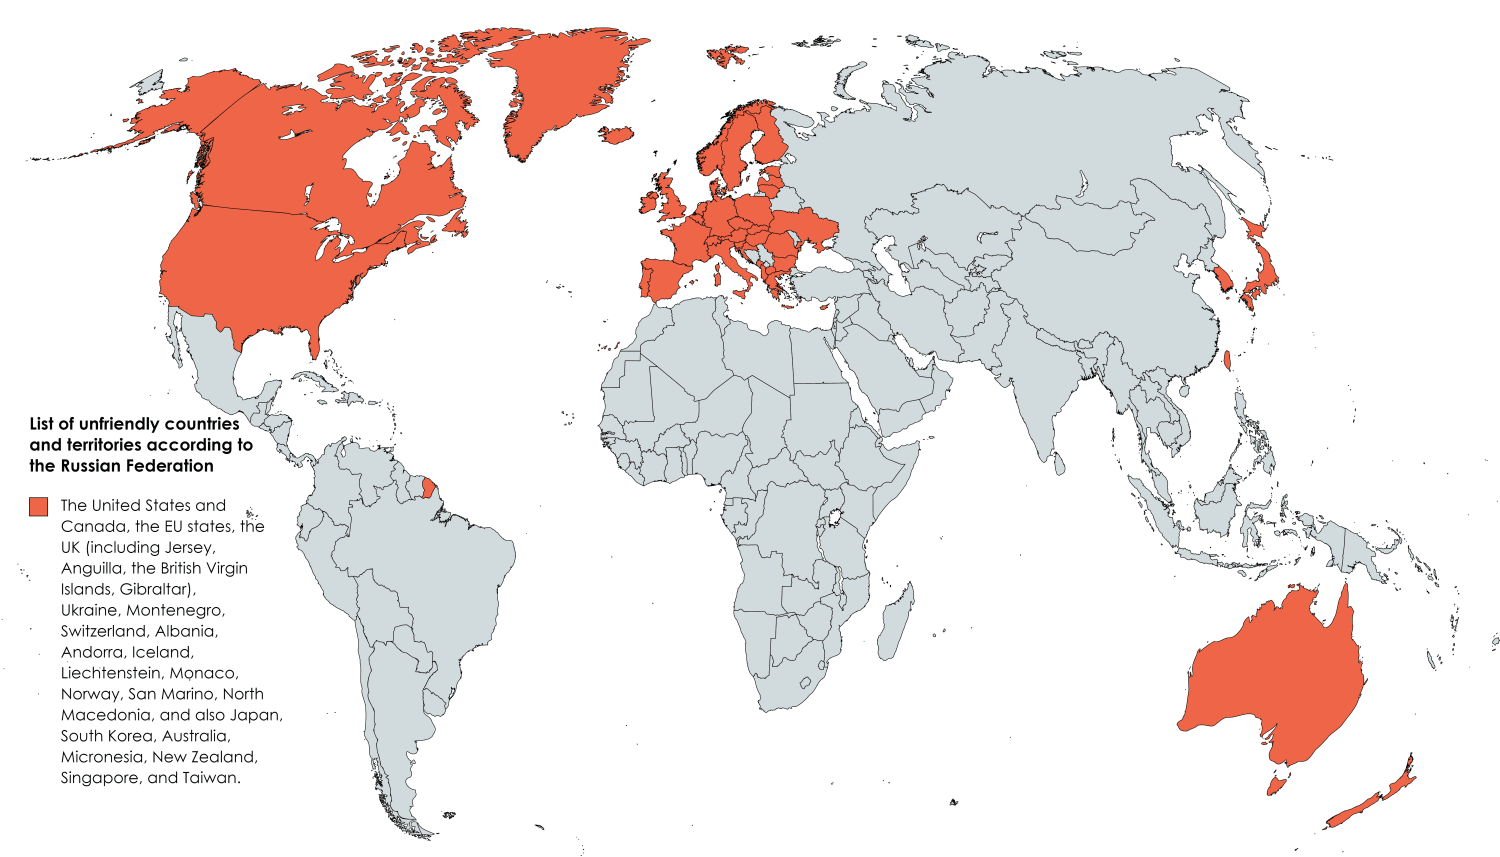 List of unfriendly countries and territories according to the Russian Federation (approved 6 February 2022)